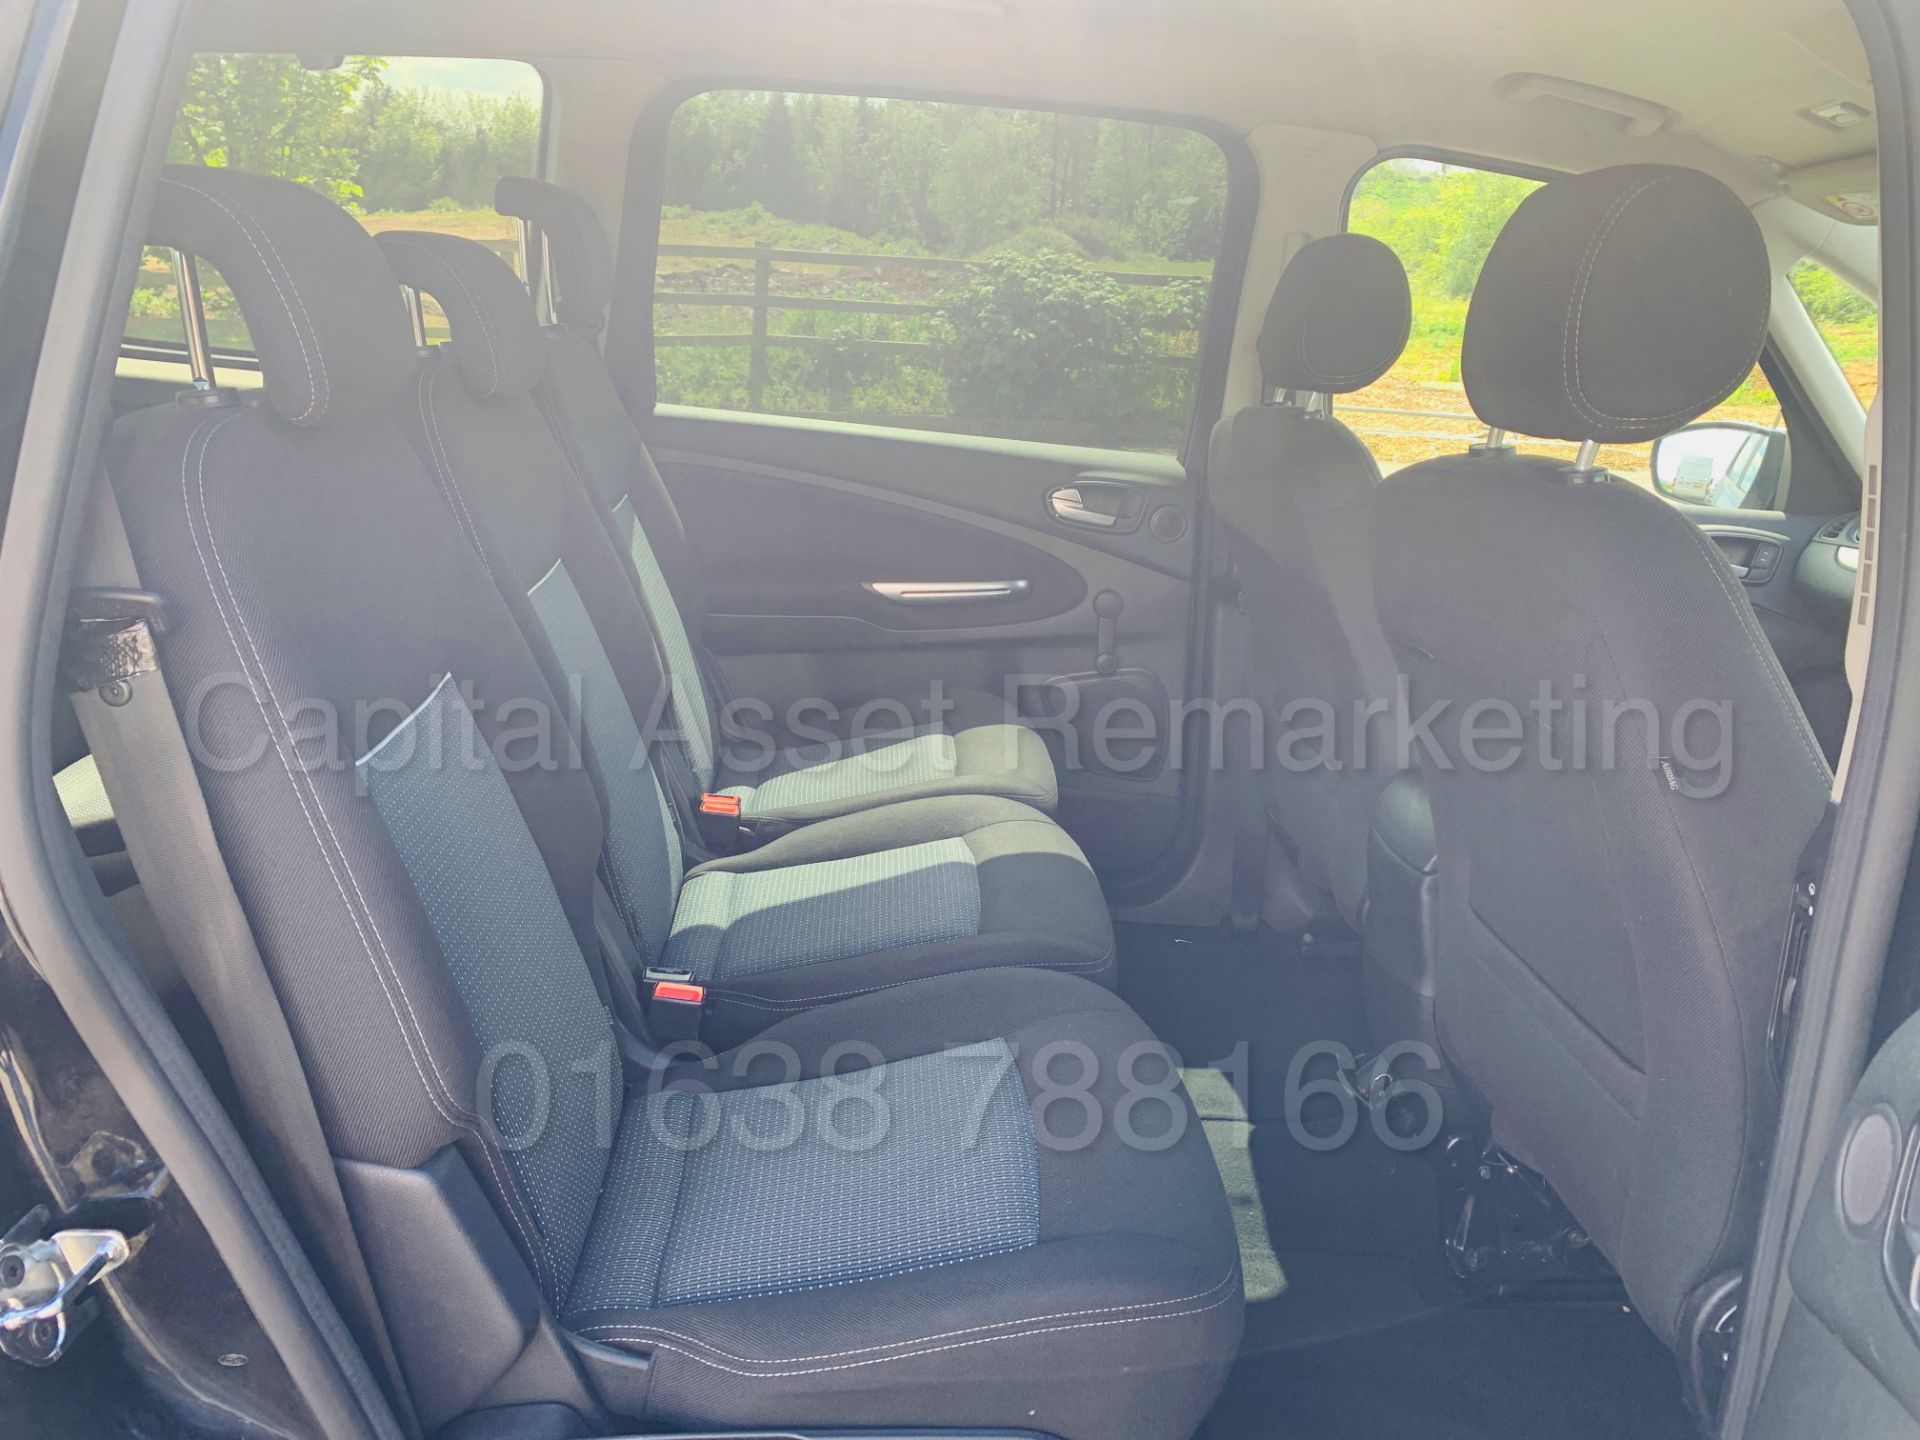 (On Sale) FORD GALAXY *ZETEC* 7 SEATER MPV (2015) '2.0 TDCI - 140 BHP - POWER SHIFT' (1 OWNER) - Image 19 of 37